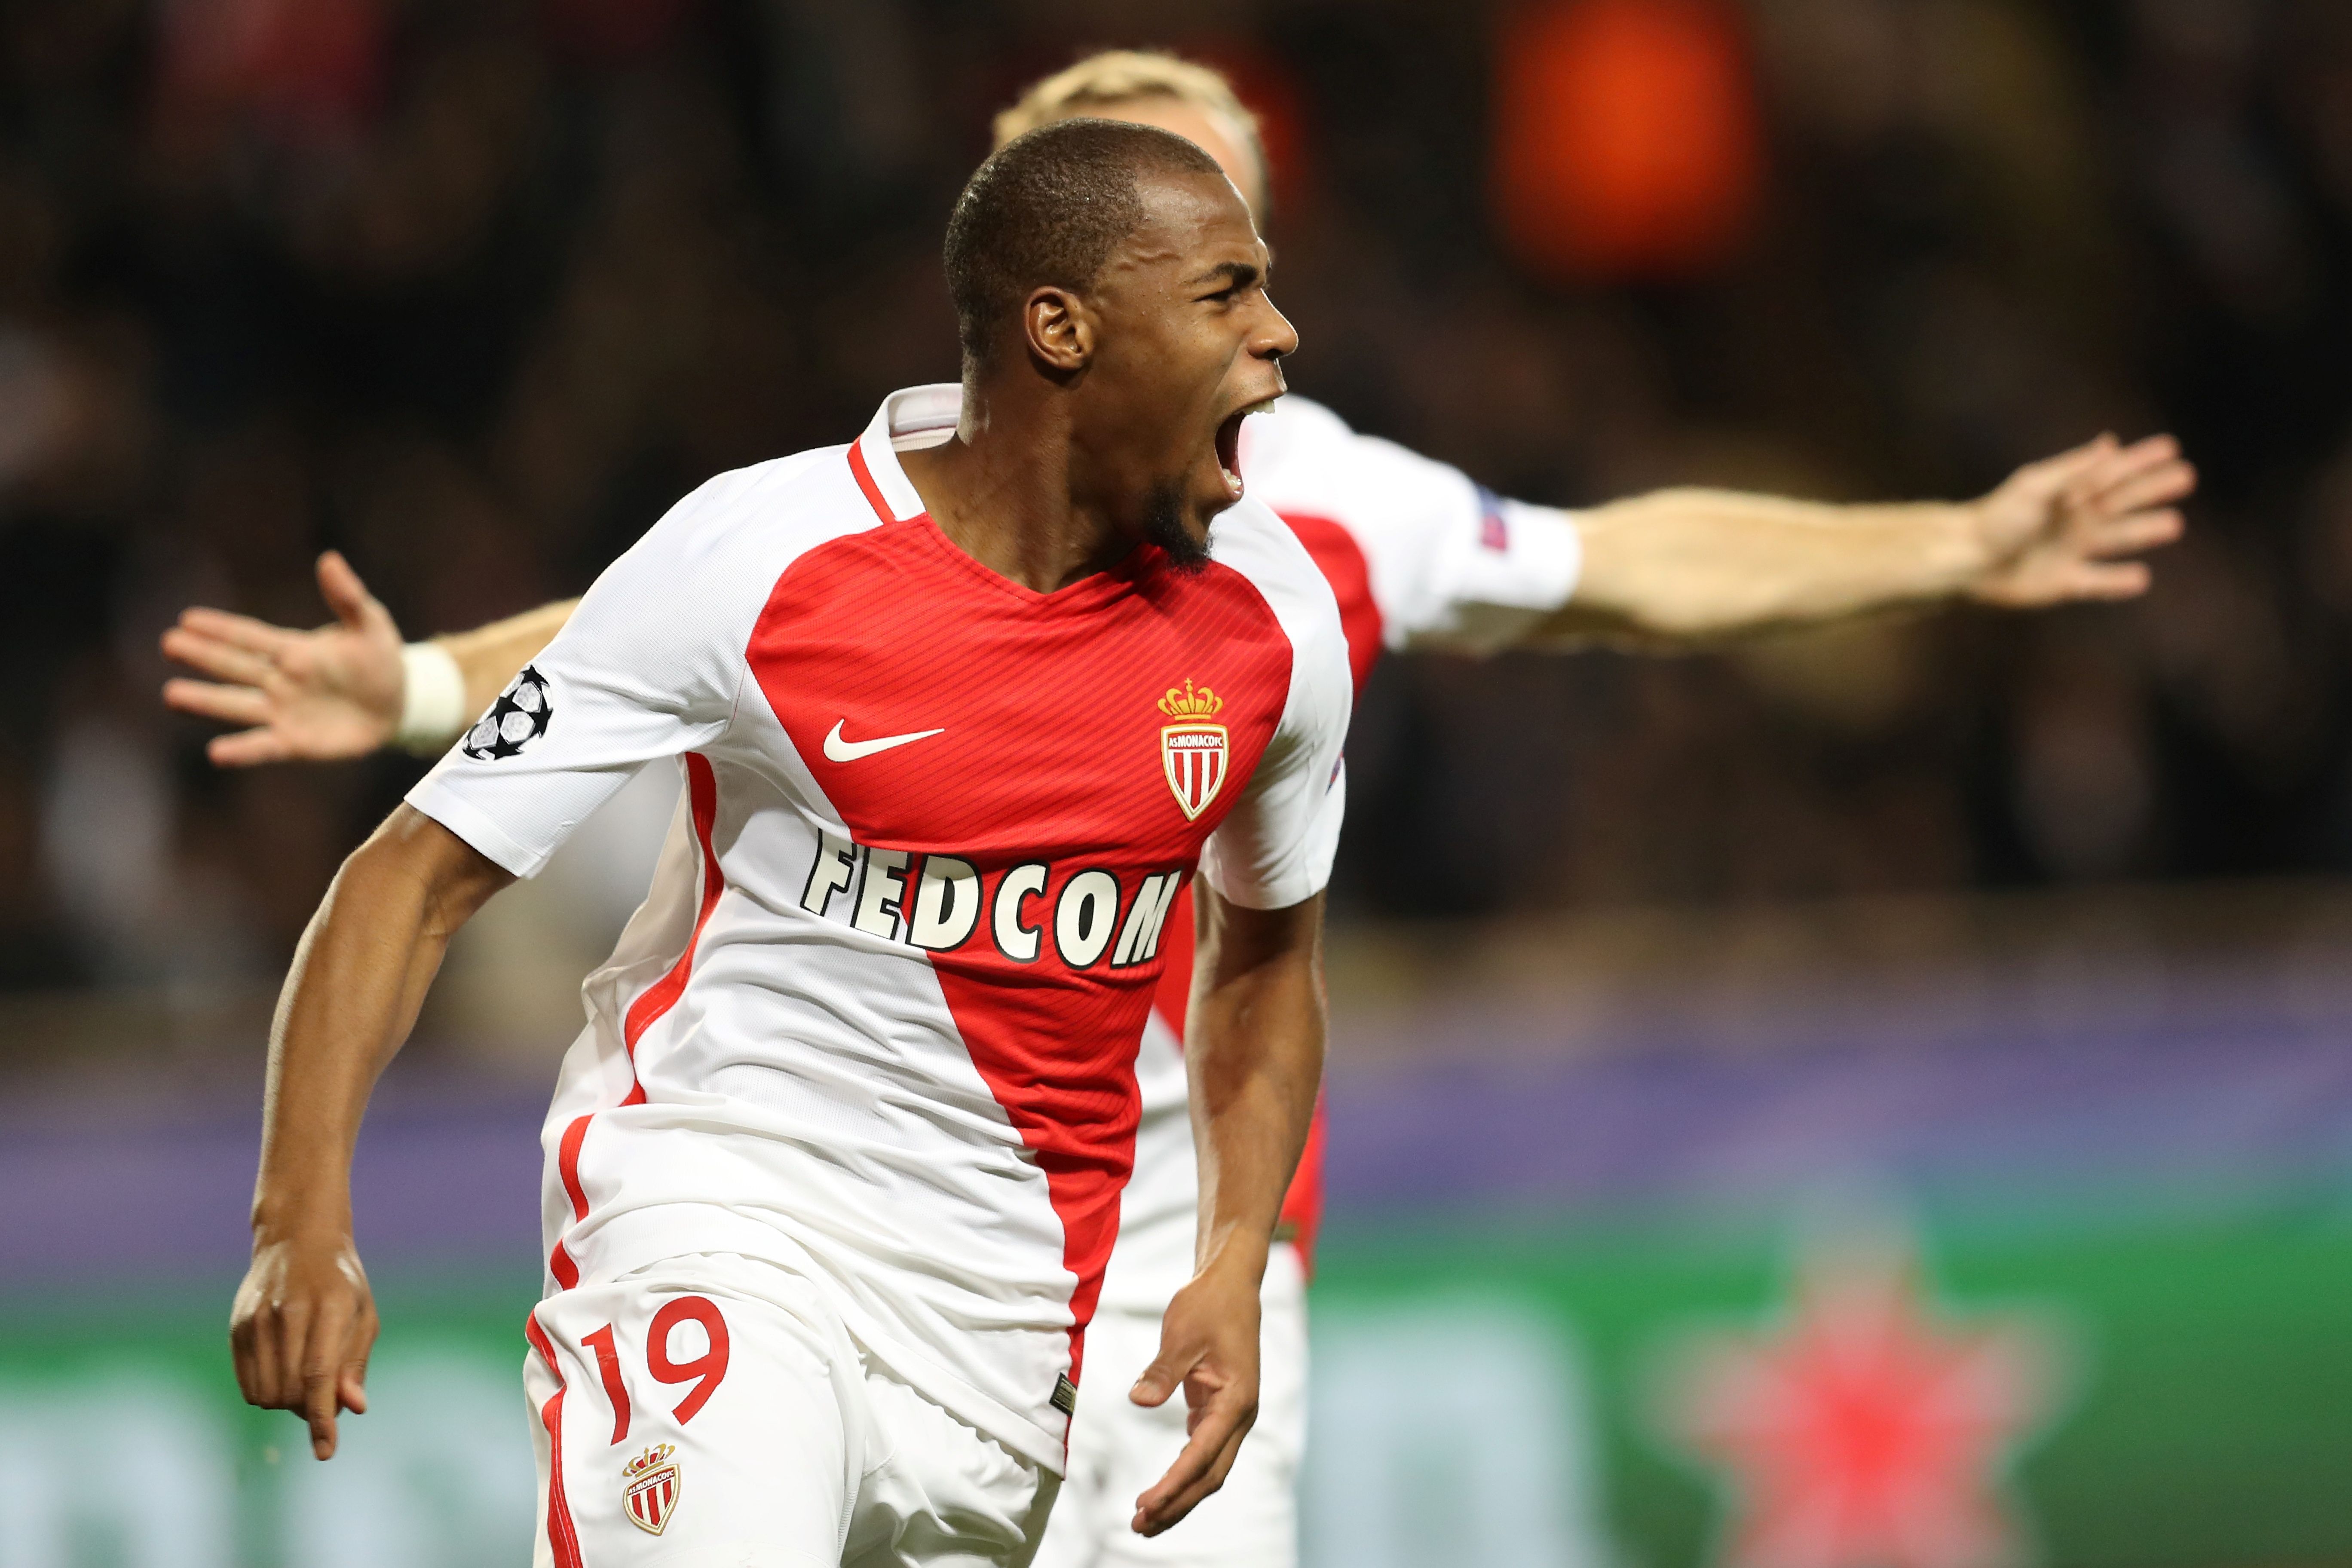 Monaco's French defender Djibril Sidibe celebrates after scoring their first goal during the UEFA Champions League group E football match AS Monaco and Tottenham Hotspur FC at the Louis II stadium in Monaco on November 22, 2016. / AFP / Valery HACHE        (Photo credit should read VALERY HACHE/AFP/Getty Images)